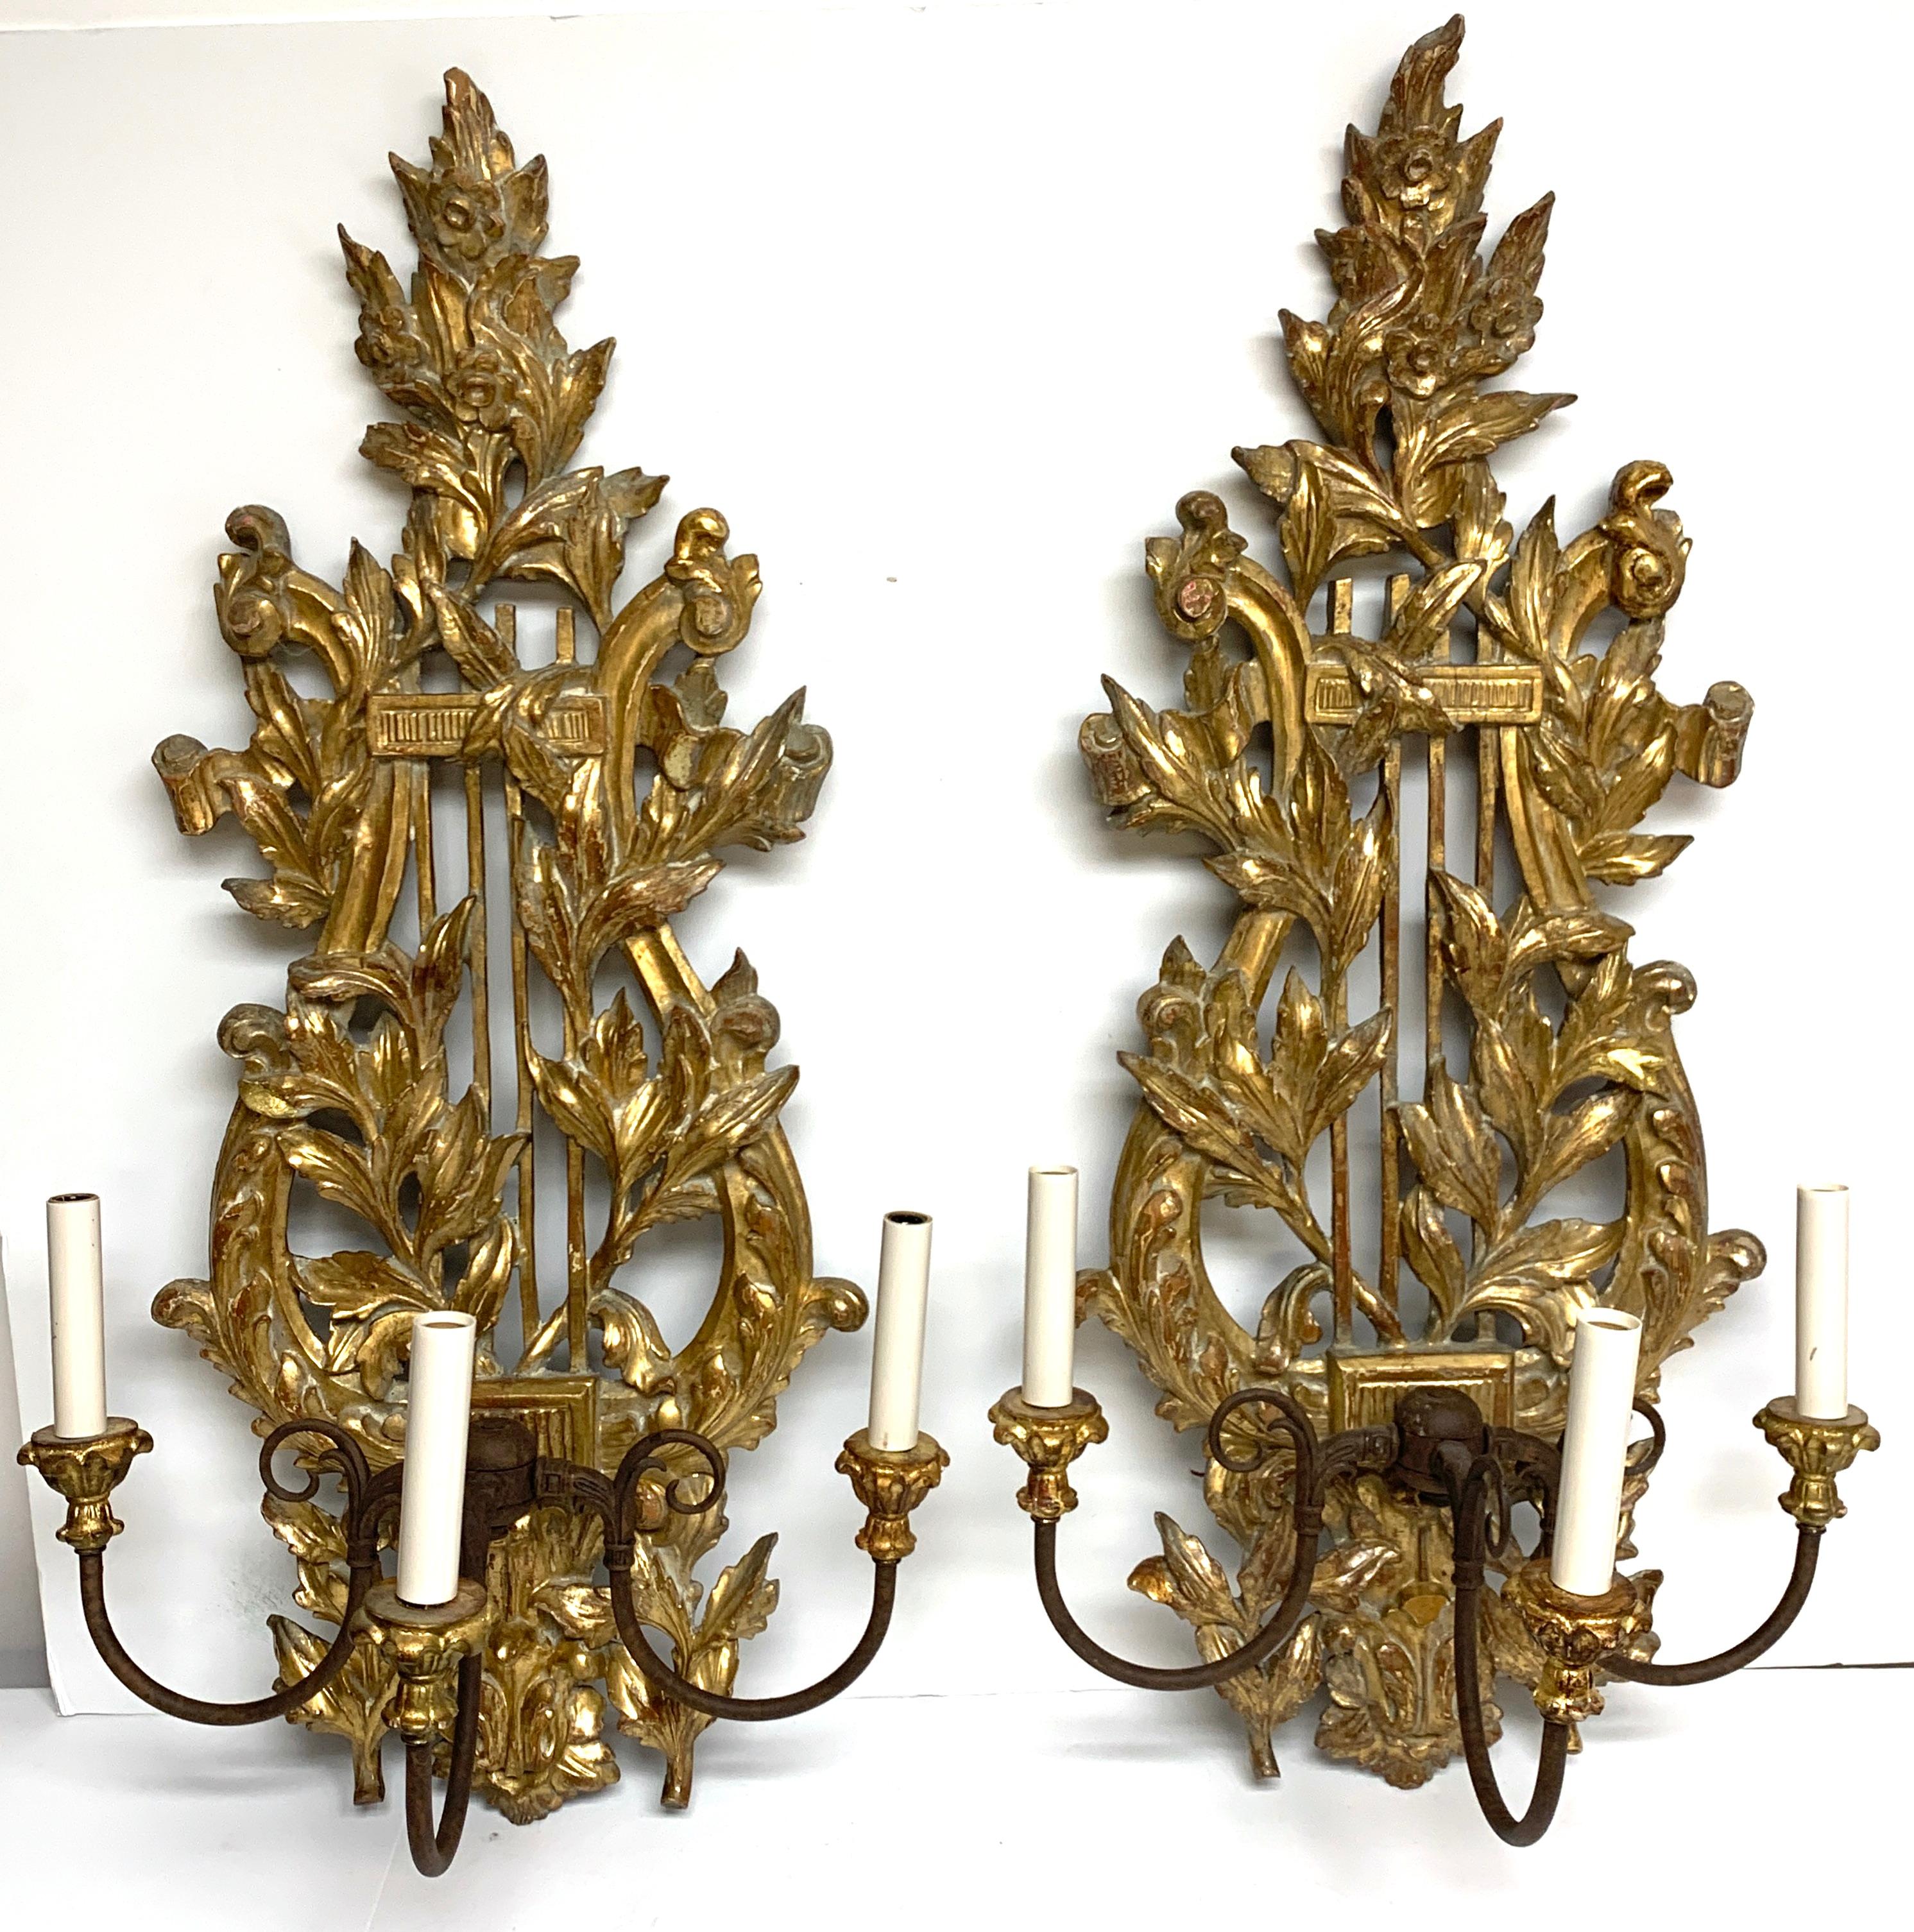 Pair of French Carved Giltwood Lyre Motif Three Light Wall Sconces, Each one beautifully carved, gessoed and water gilt, fitted with three patinated bronze candelabra lights. Each sconce measures 32